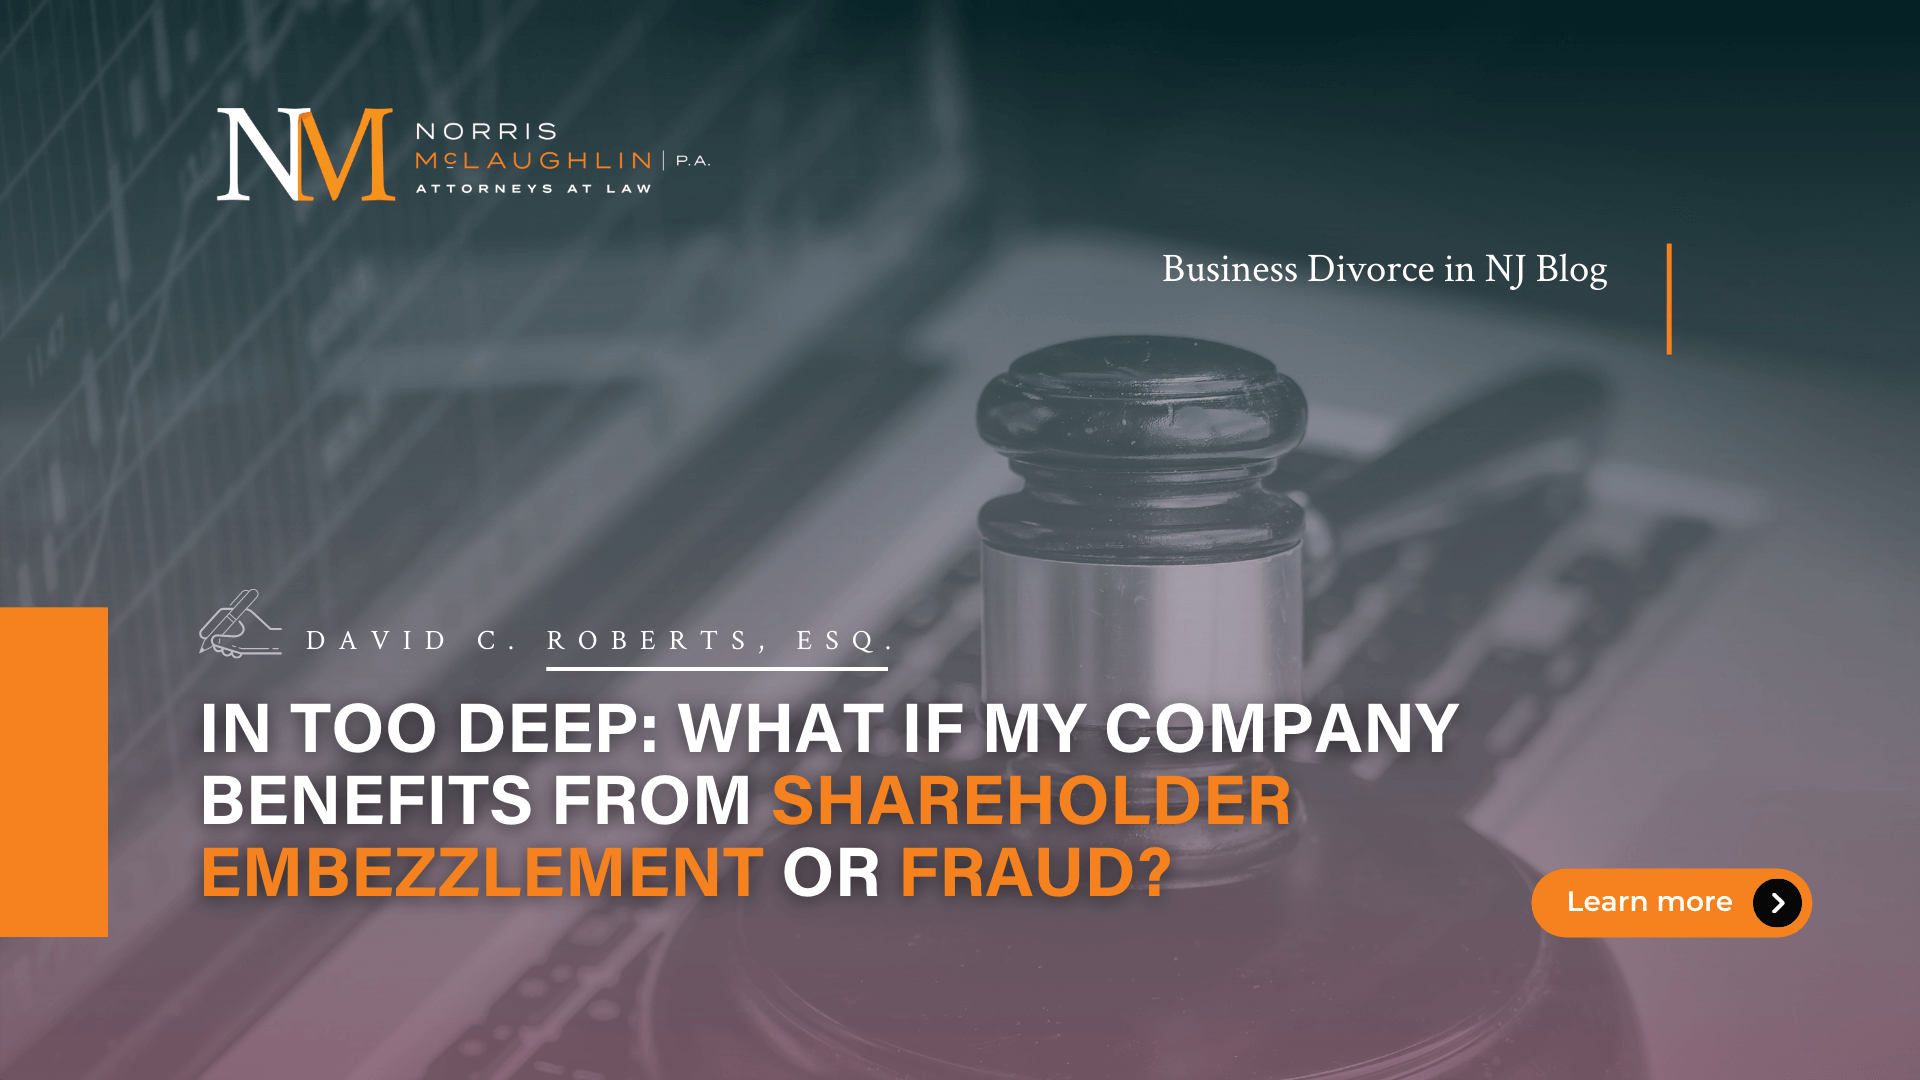 What if My Company Benefits from Shareholder Embezzlement or Fraud?